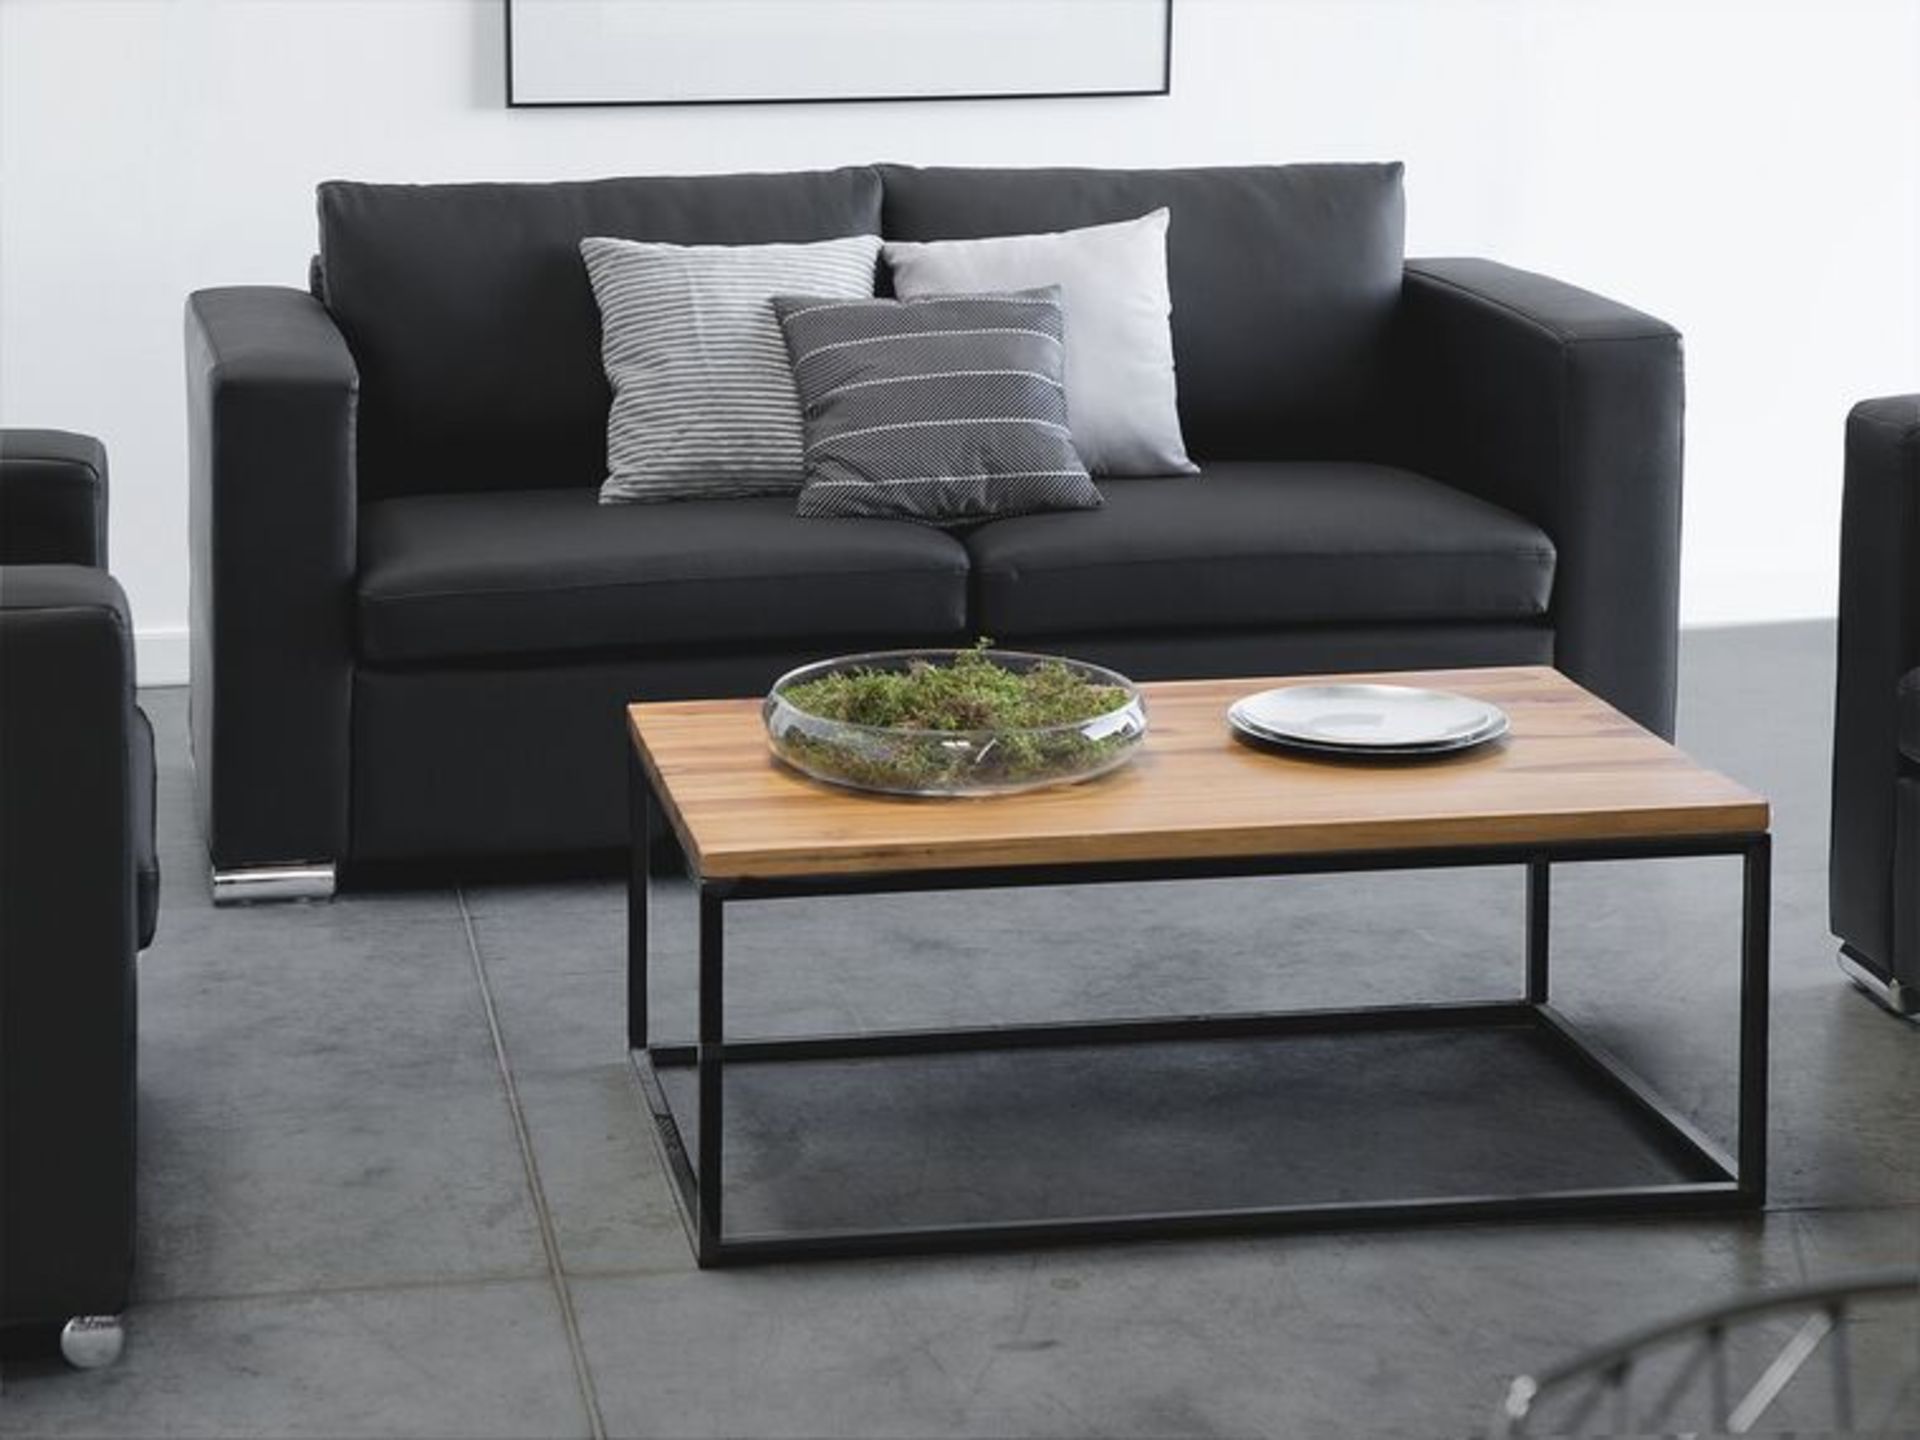 Helsinki 2 Seater Leather Sofa Black. - R14. RRP £739.99. An ultimate 2-seat leather sofa that - Image 2 of 2